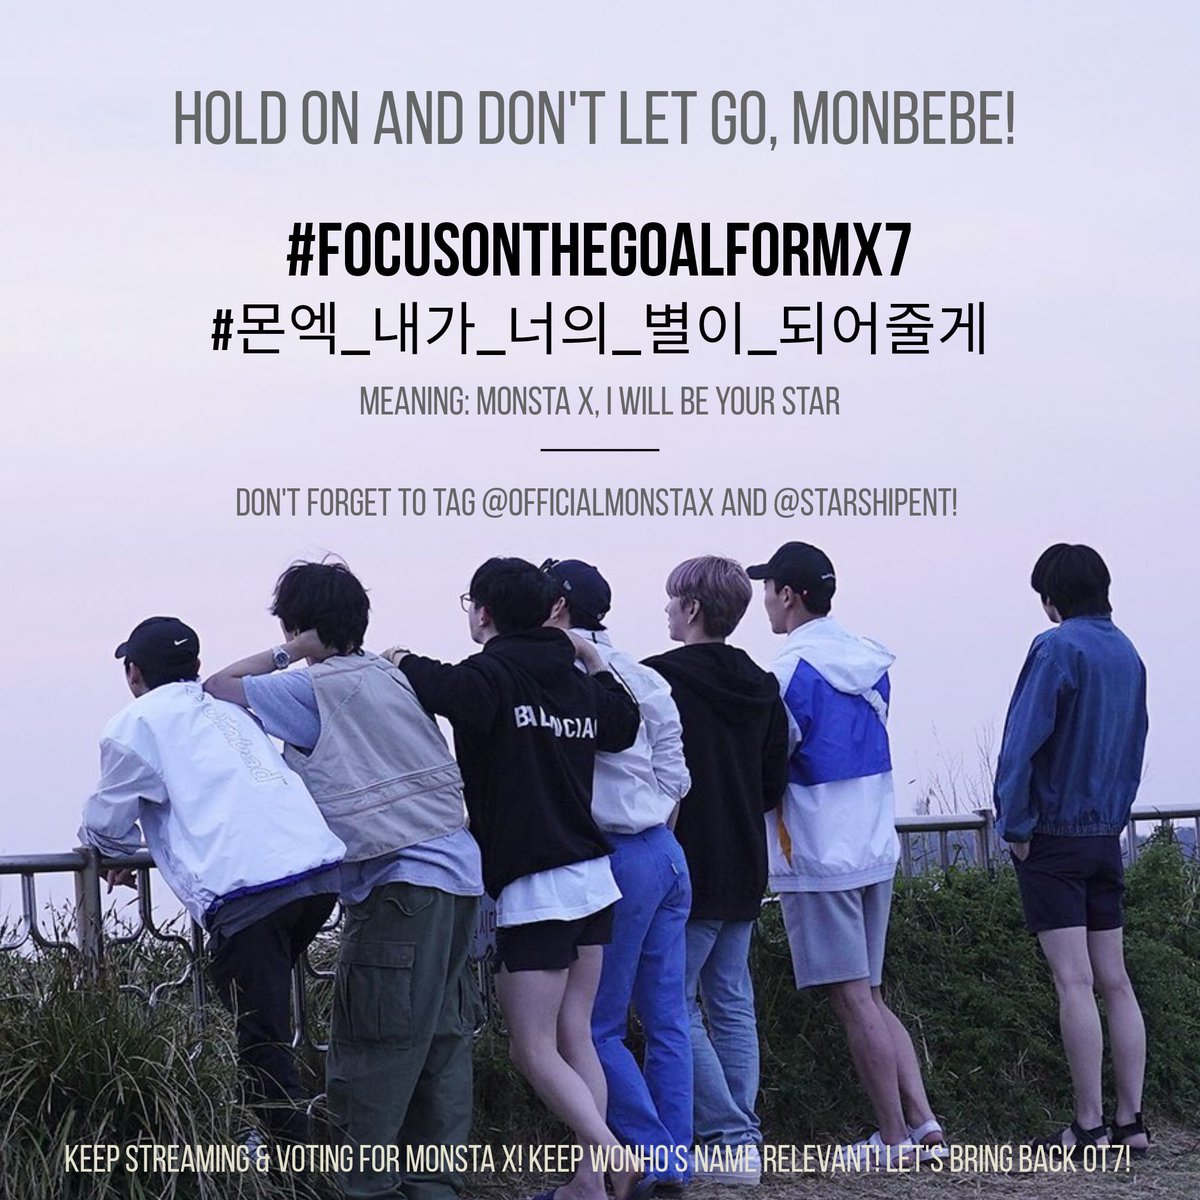 2020031012am KST onwards242nd Hashtags @OfficialMonstaX  @STARSHIPent  #FocusOnTheGoalForMX7  #몬엑_내가_너의_별이_되어줄게 477 official protest Hashtags